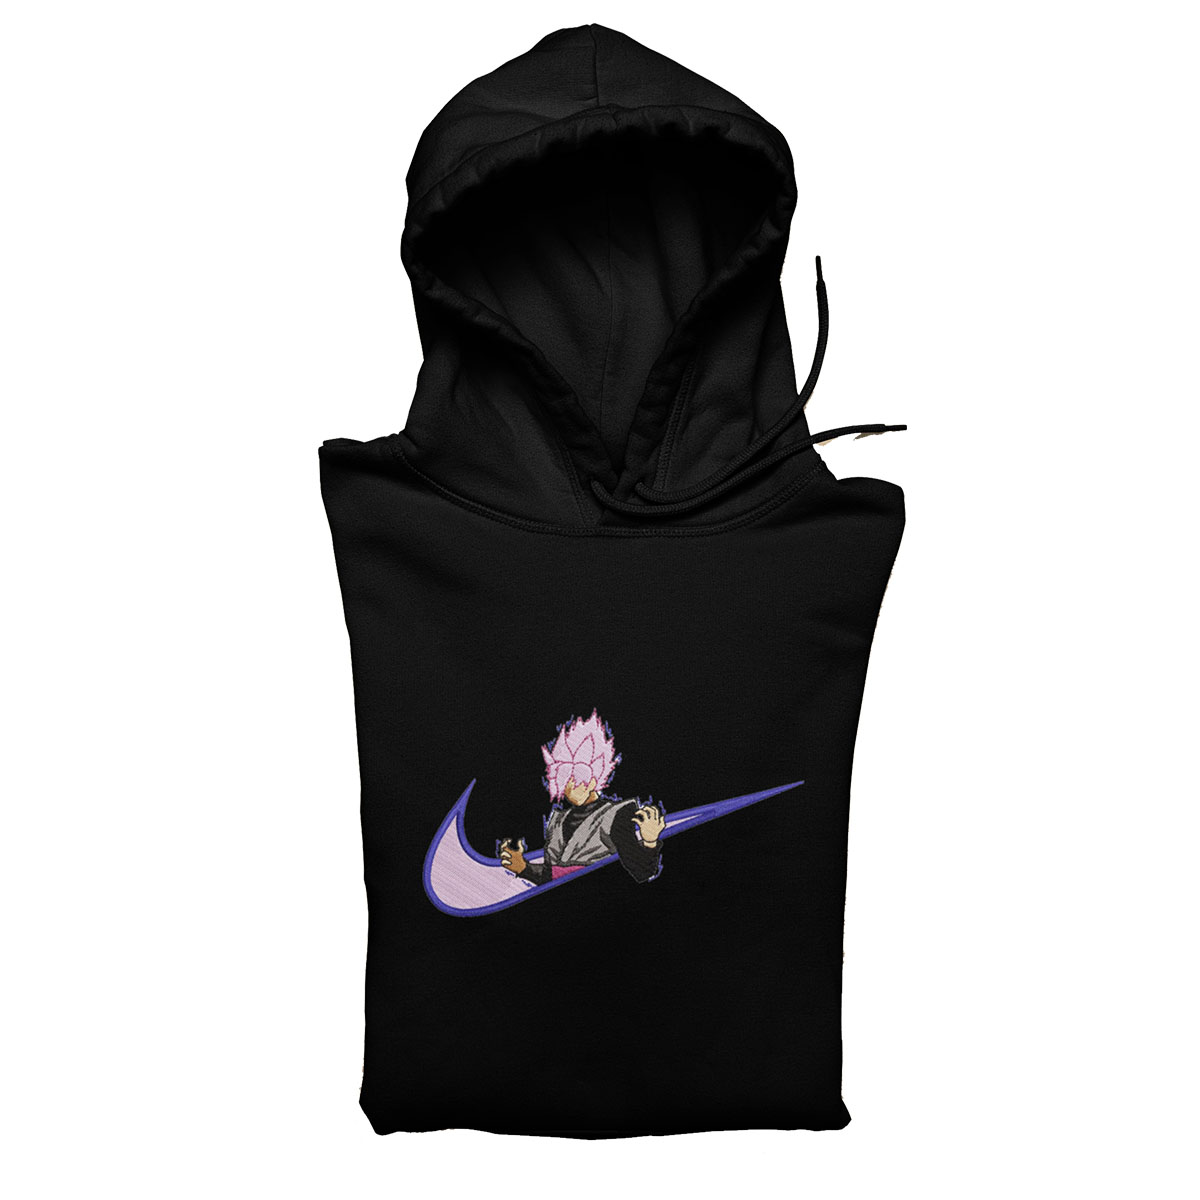 Im thinking to start an instagram page for selling embroidered hoodies like  this swoosh anime etc  And i dont live in usa Does it comes under  copyright infringement as it looks